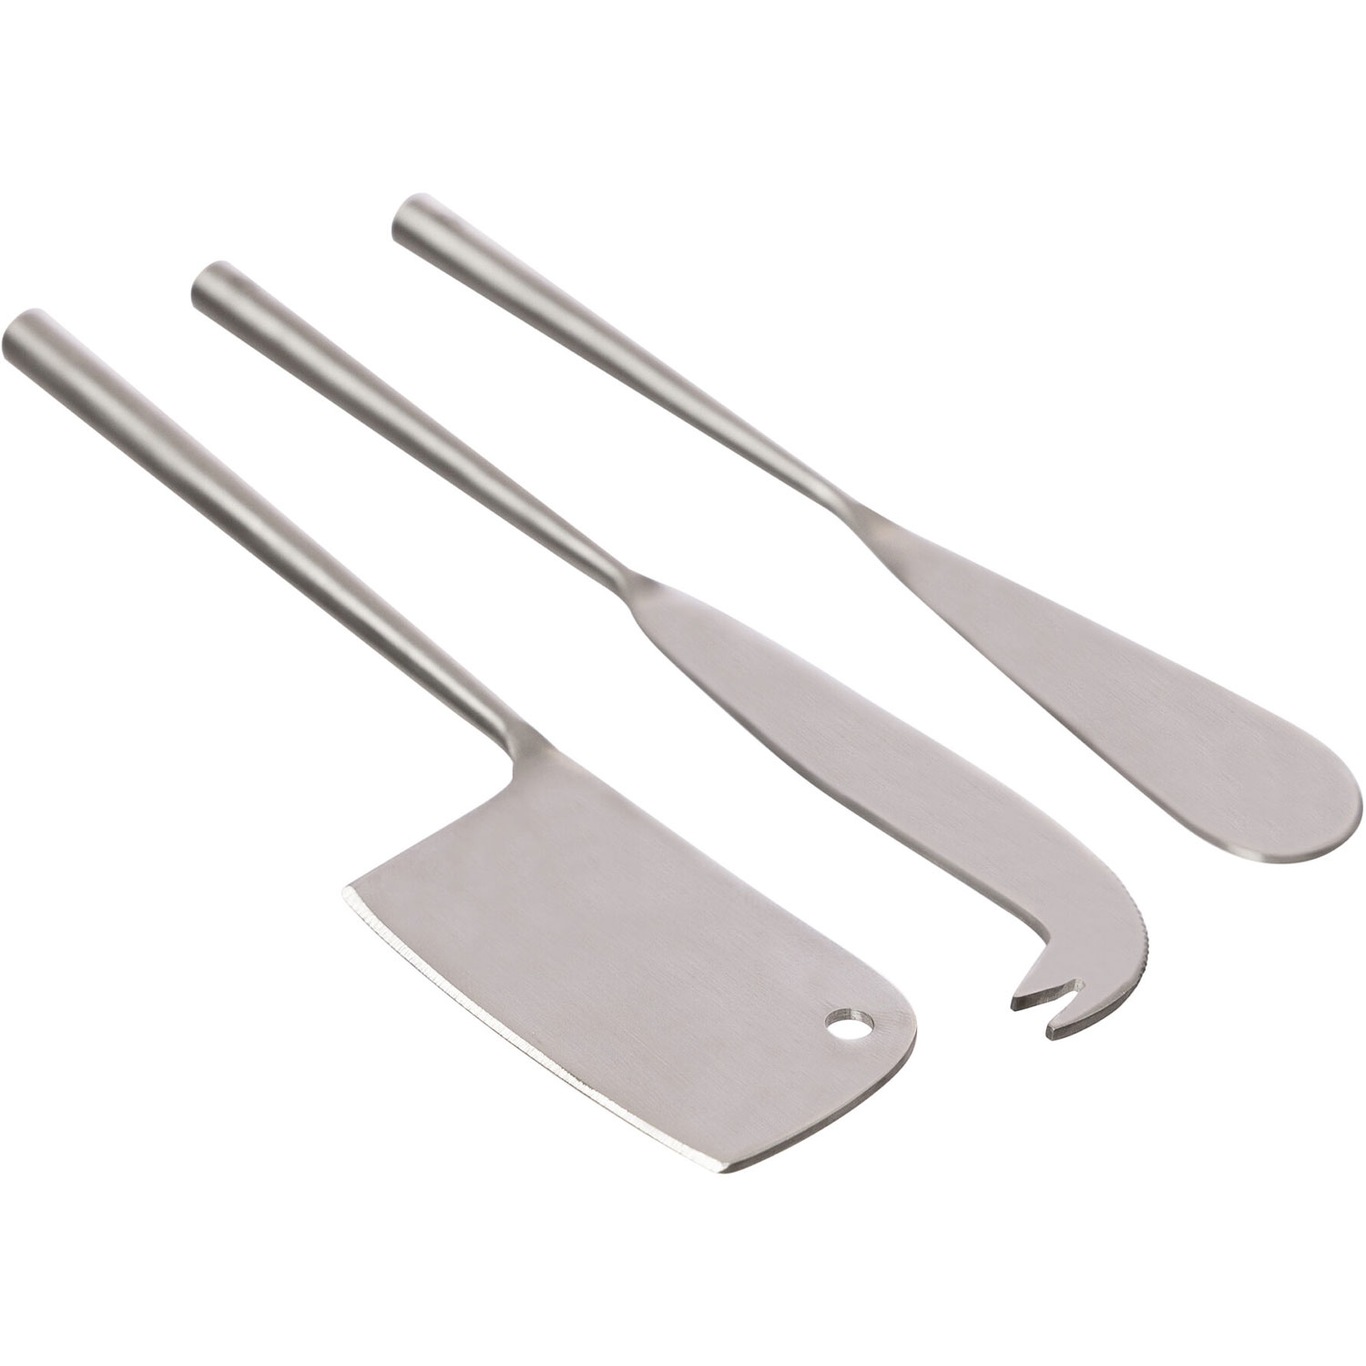 Cheese Knife Set Brushed Steel, 3-pack